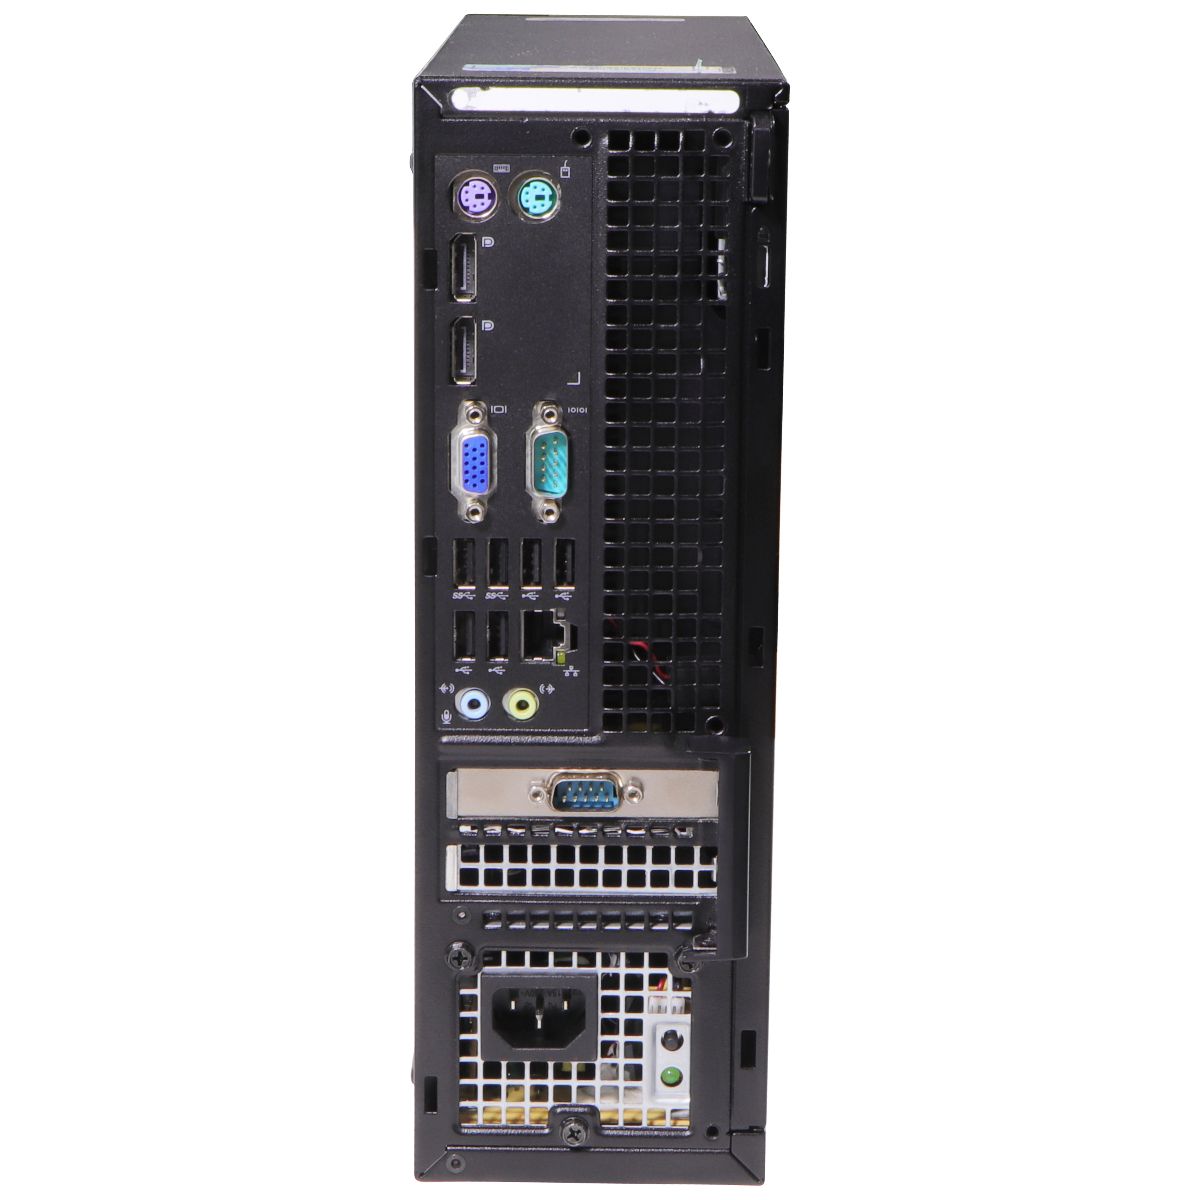 Dell Optiplex 7020 (D07S) SFF Desktop PC Intel i3-4150/500GB HDD/16GB/10 Home PC Desktops & All-In-Ones Dell    - Simple Cell Bulk Wholesale Pricing - USA Seller